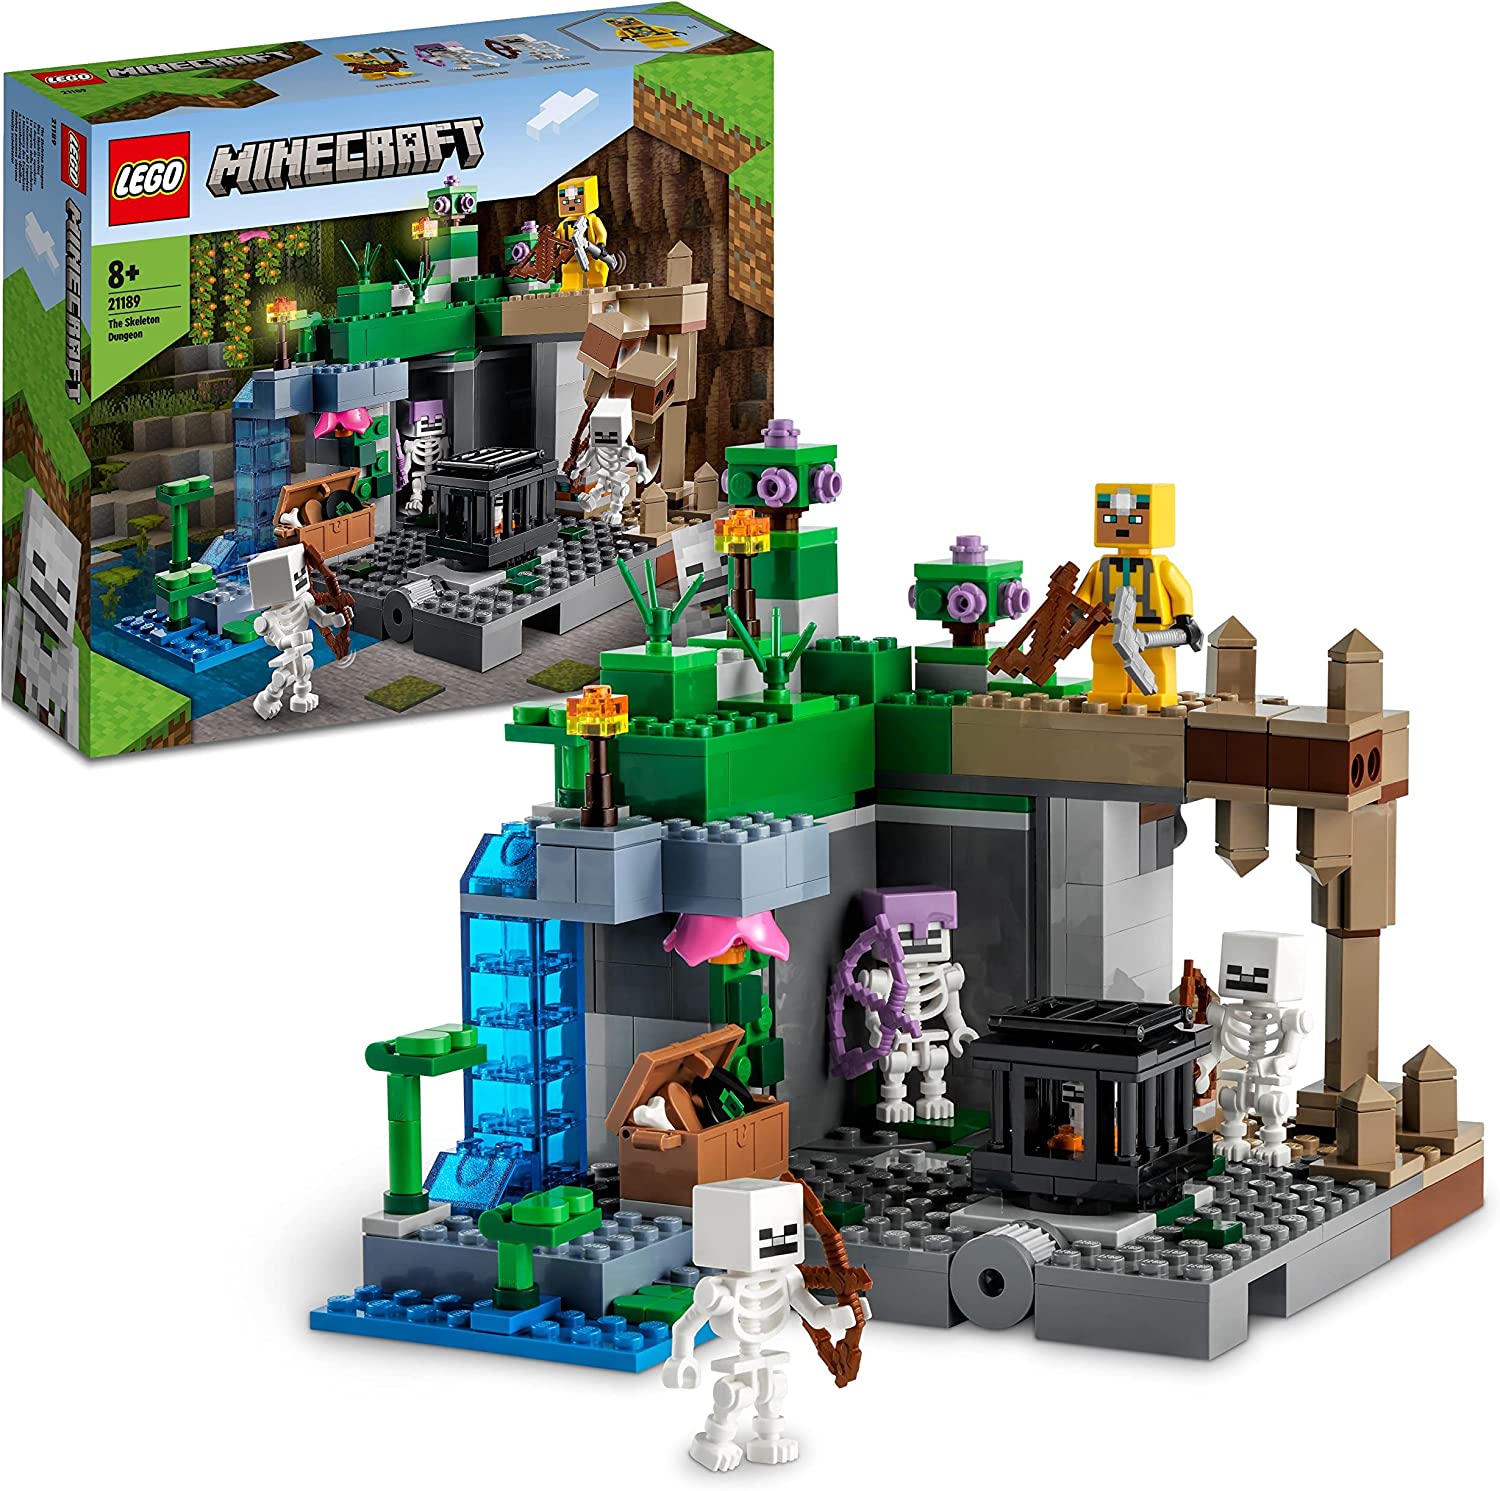 LEGO 21189 Minecraft The Skeleton Fleece Set with Caves, Skeleton Figures, Enemy Creatures and Accessories, Toys for Children